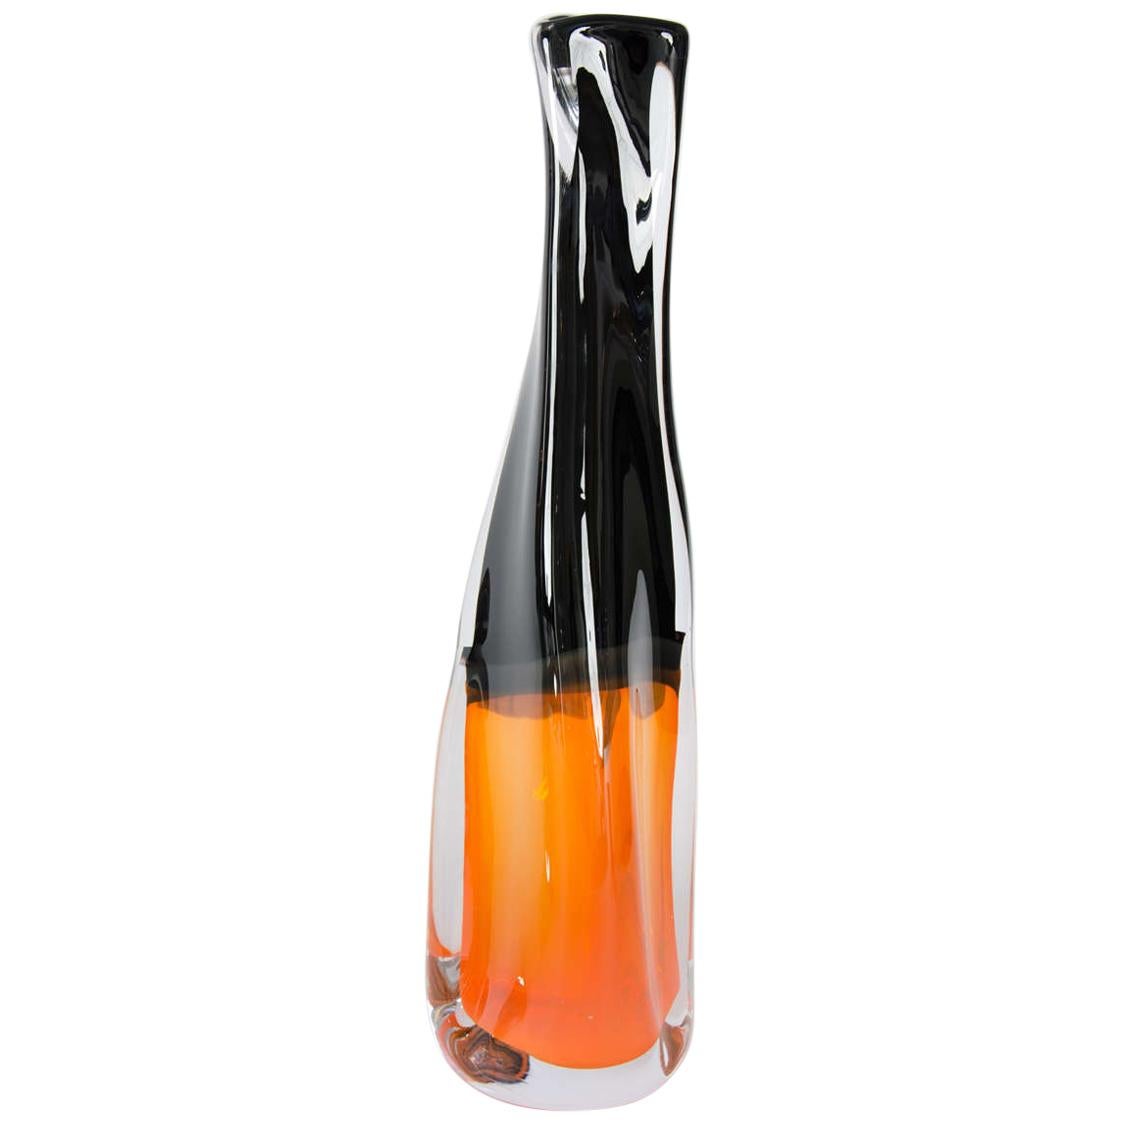 Sommercalmo 83, a Unique glass Vase in clear, black & orange by Vic Bamforth